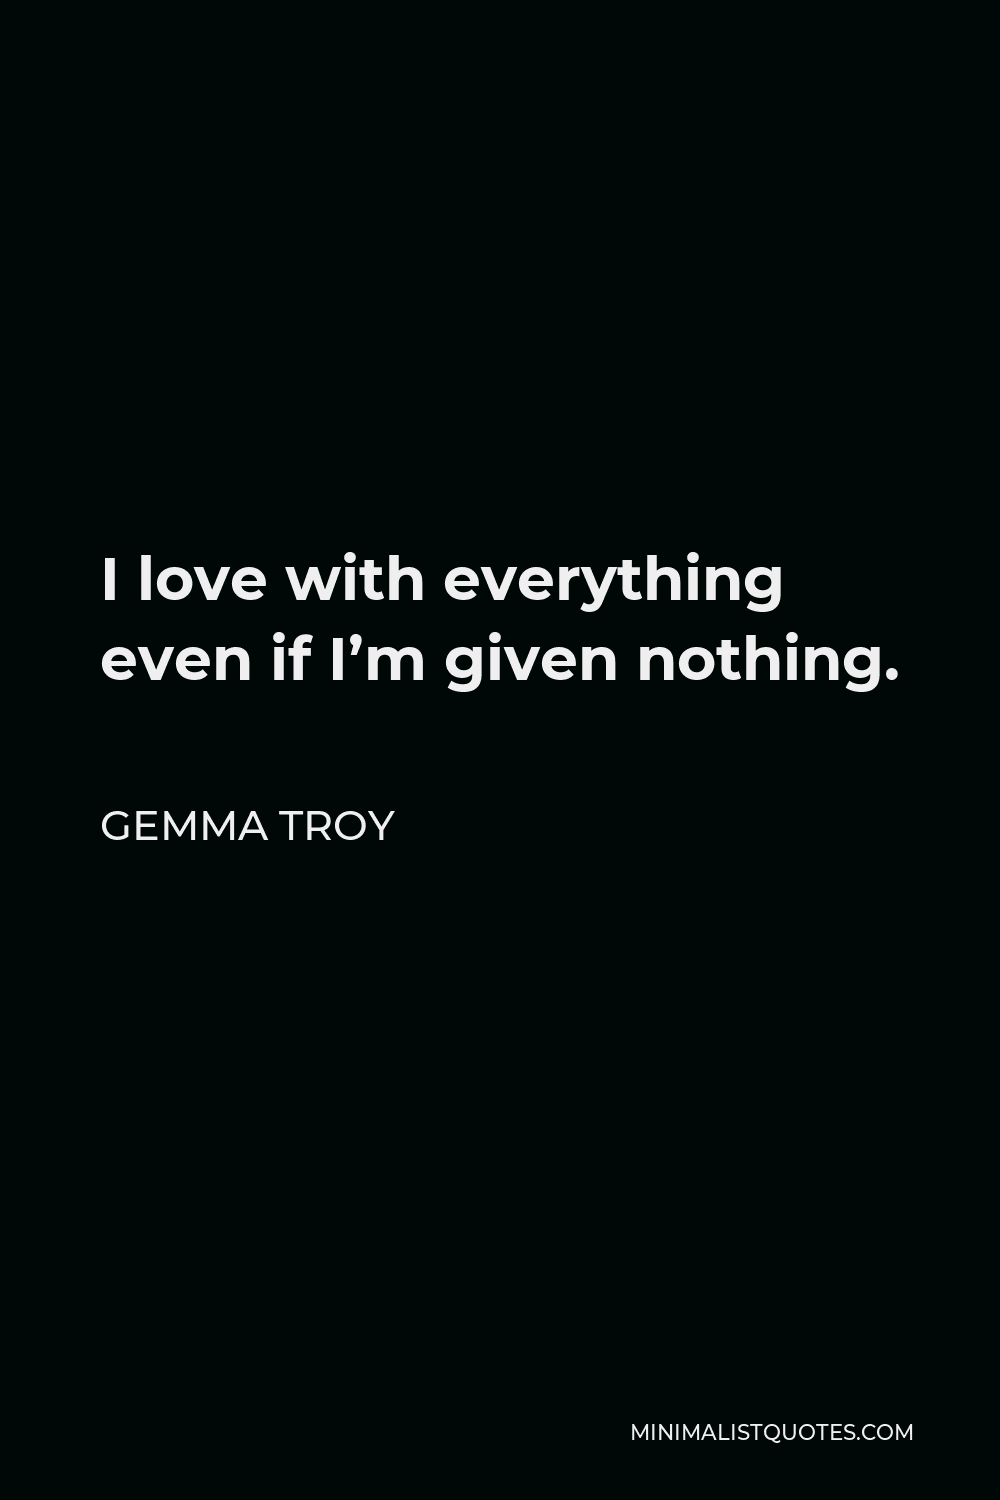 Gemma Troy Quote - I love with everything even if I’m given nothing.